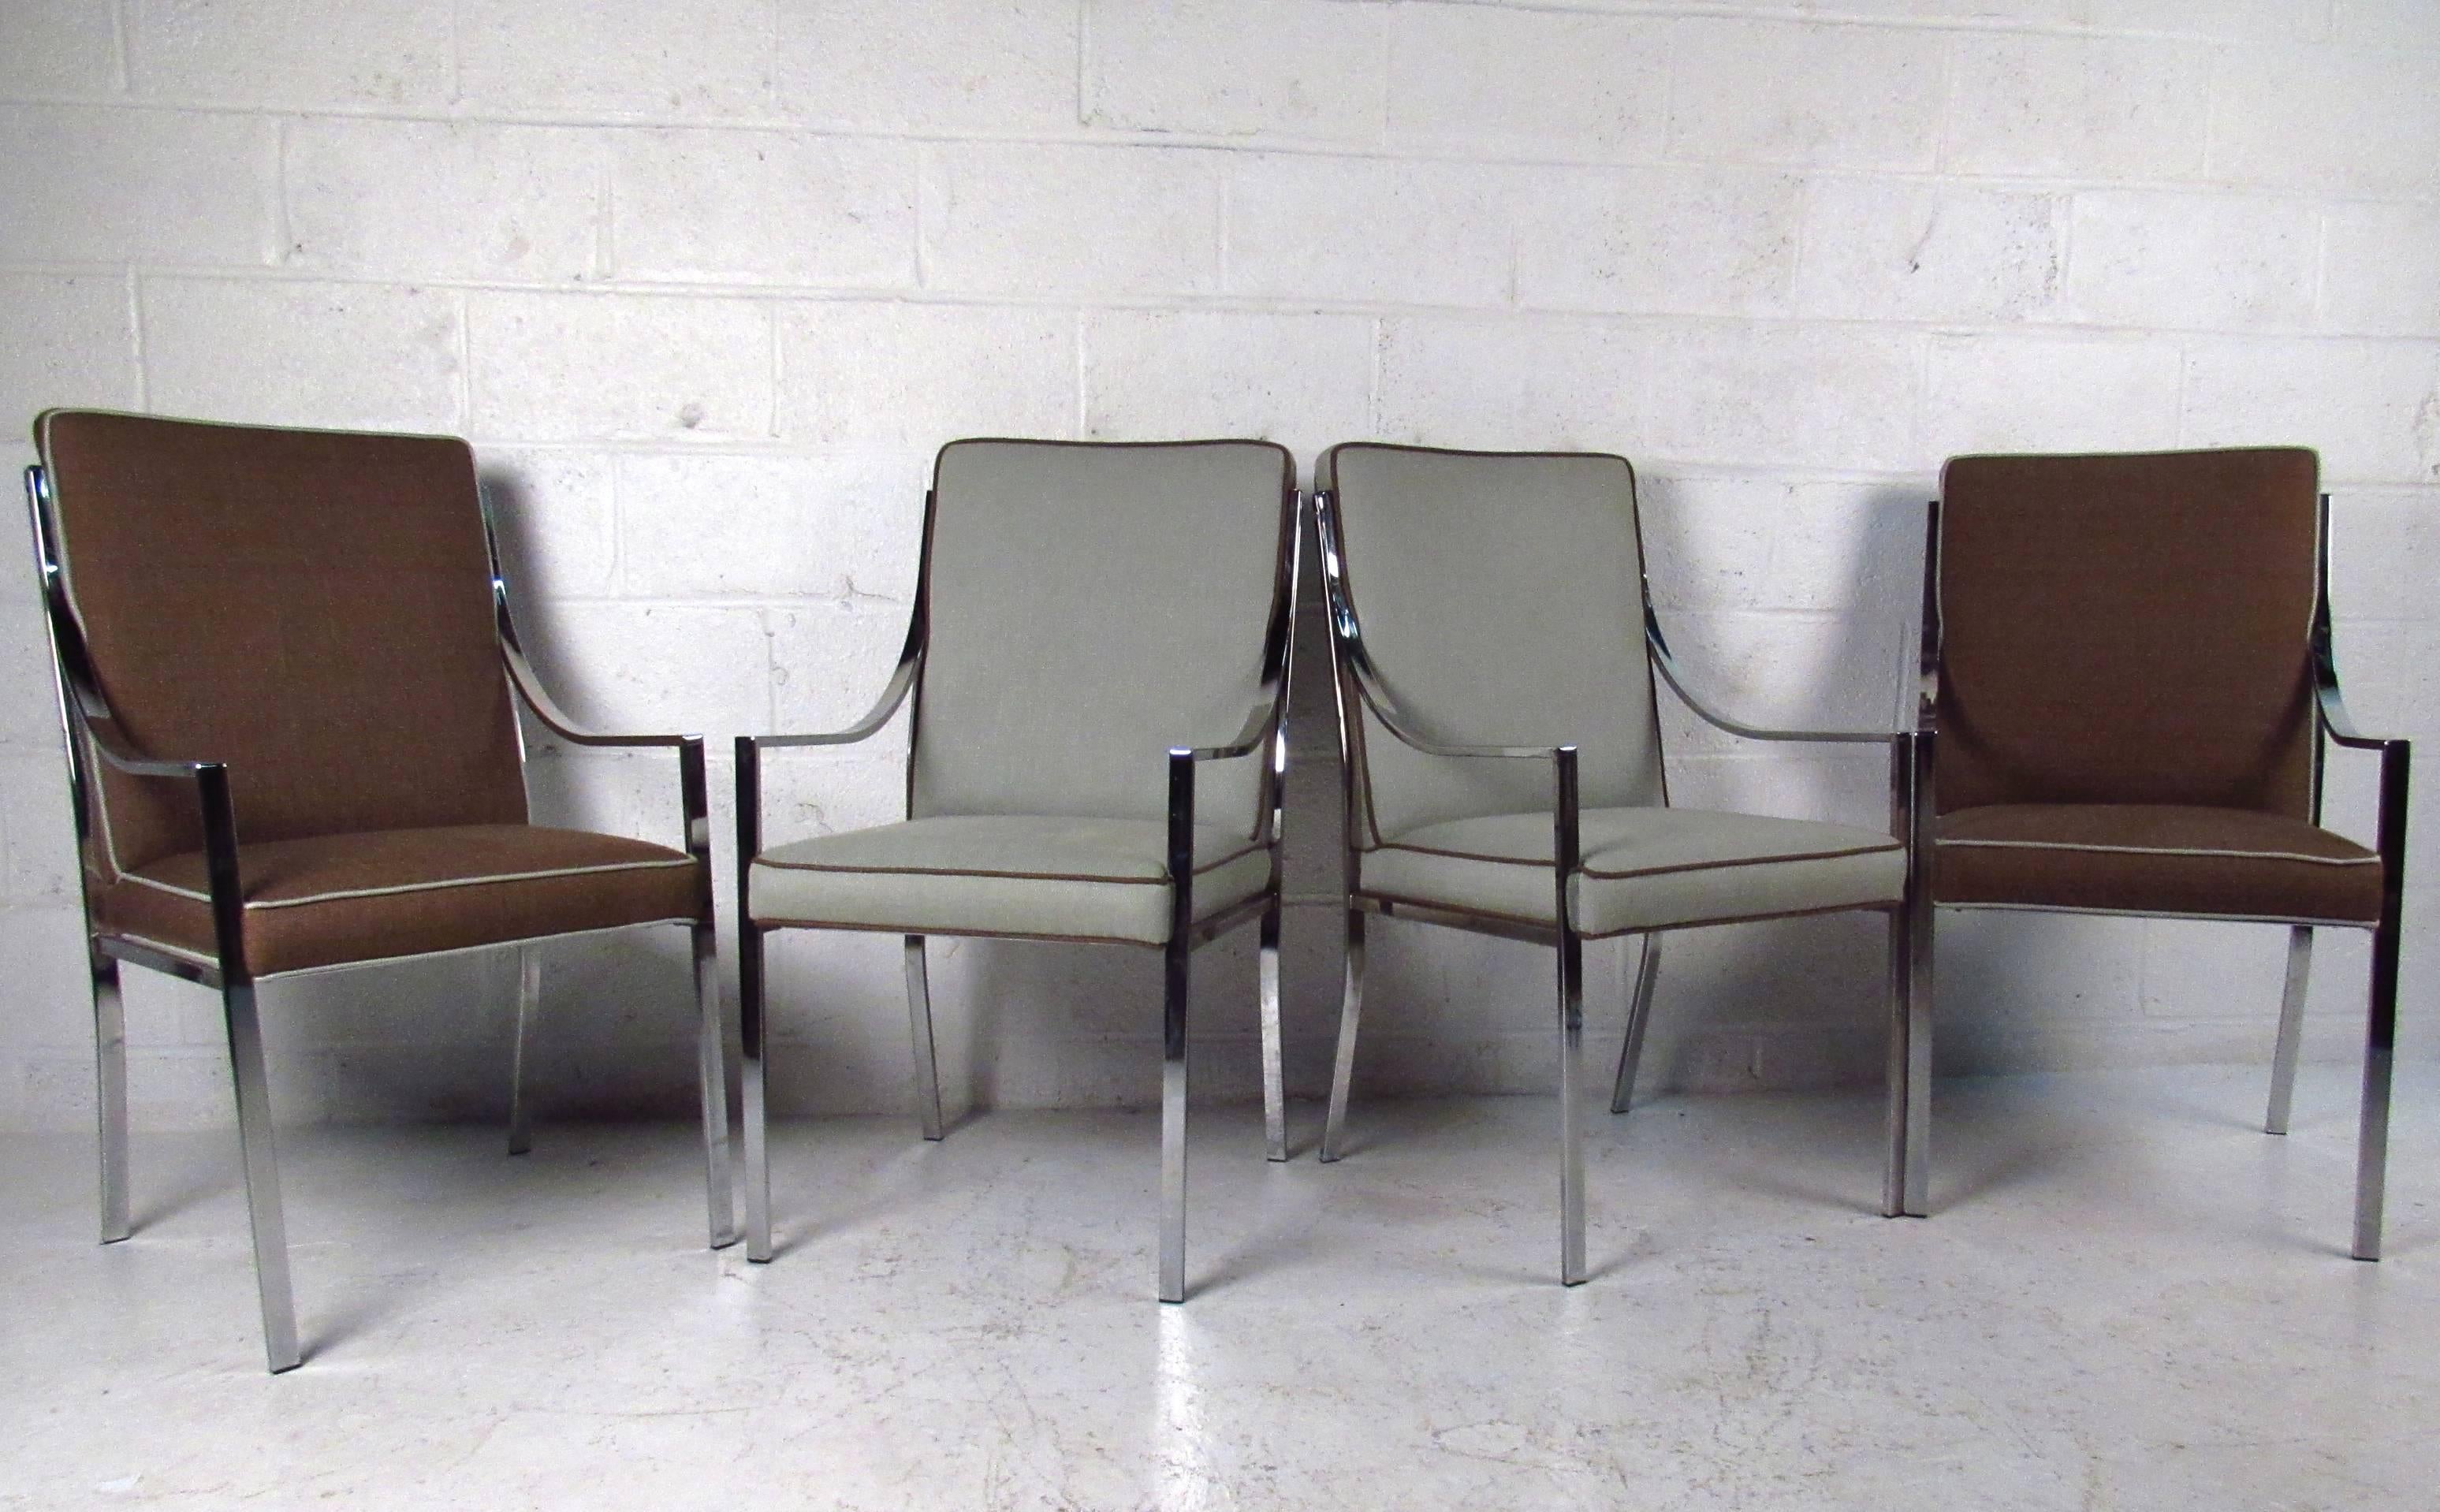 This beautiful set of chrome frame dining chairs features comfortable two-tone upholstery, unique low profile armrests, and fantastic Mid-Century style. Please confirm item location (NY or NJ).